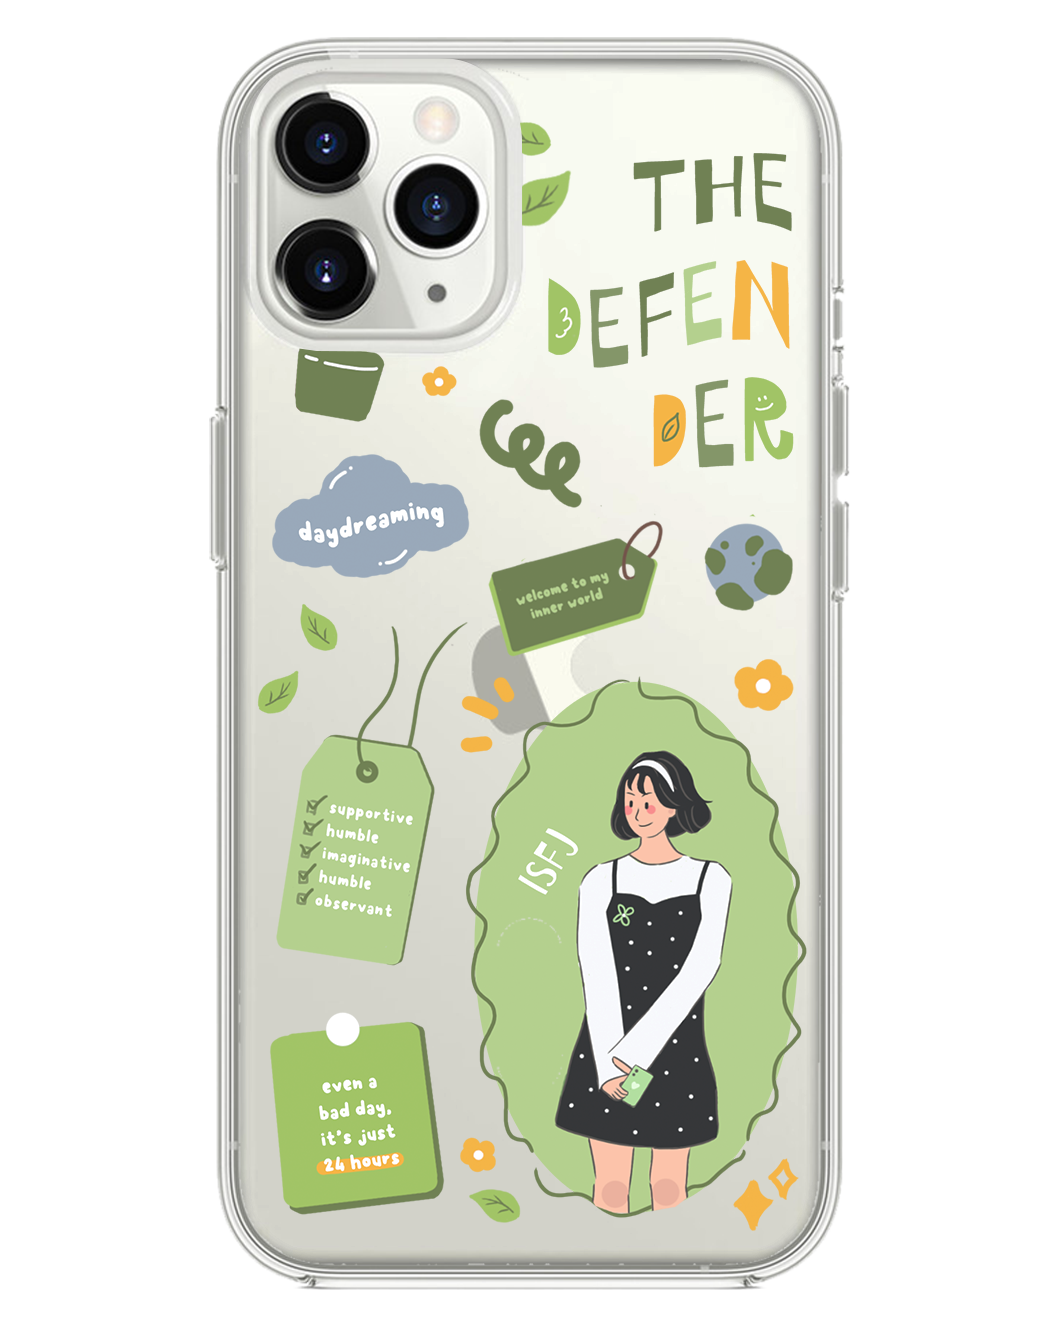 iPhone Rearguard Hybrid - ISFJ (The Defender)